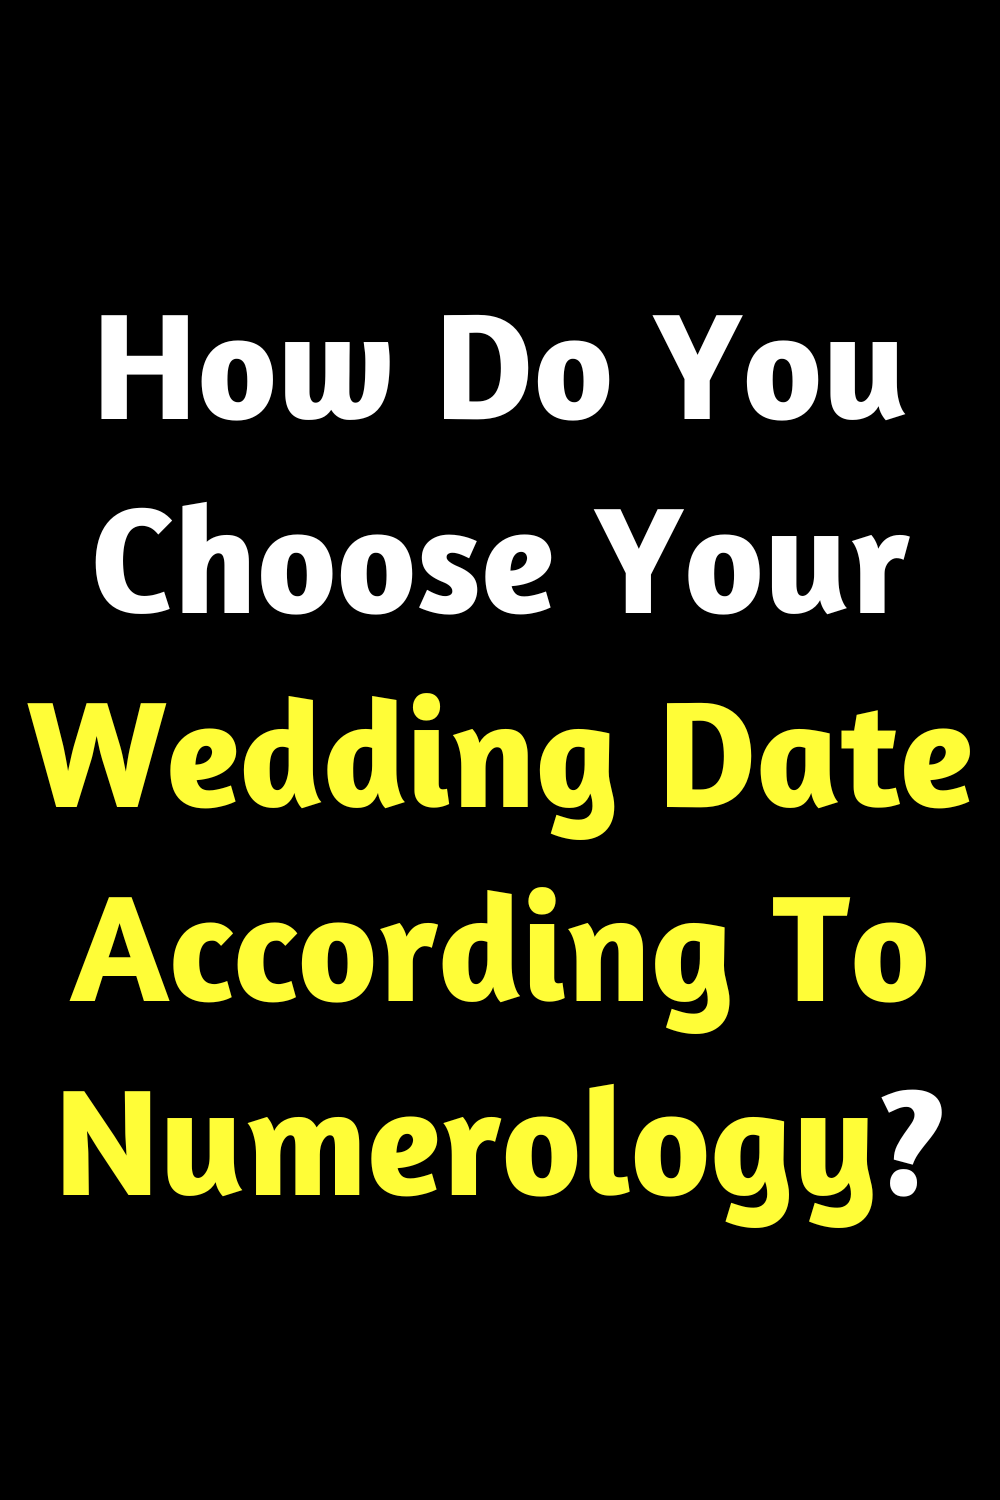 How Do You Choose Your Wedding Date According To Numerology?